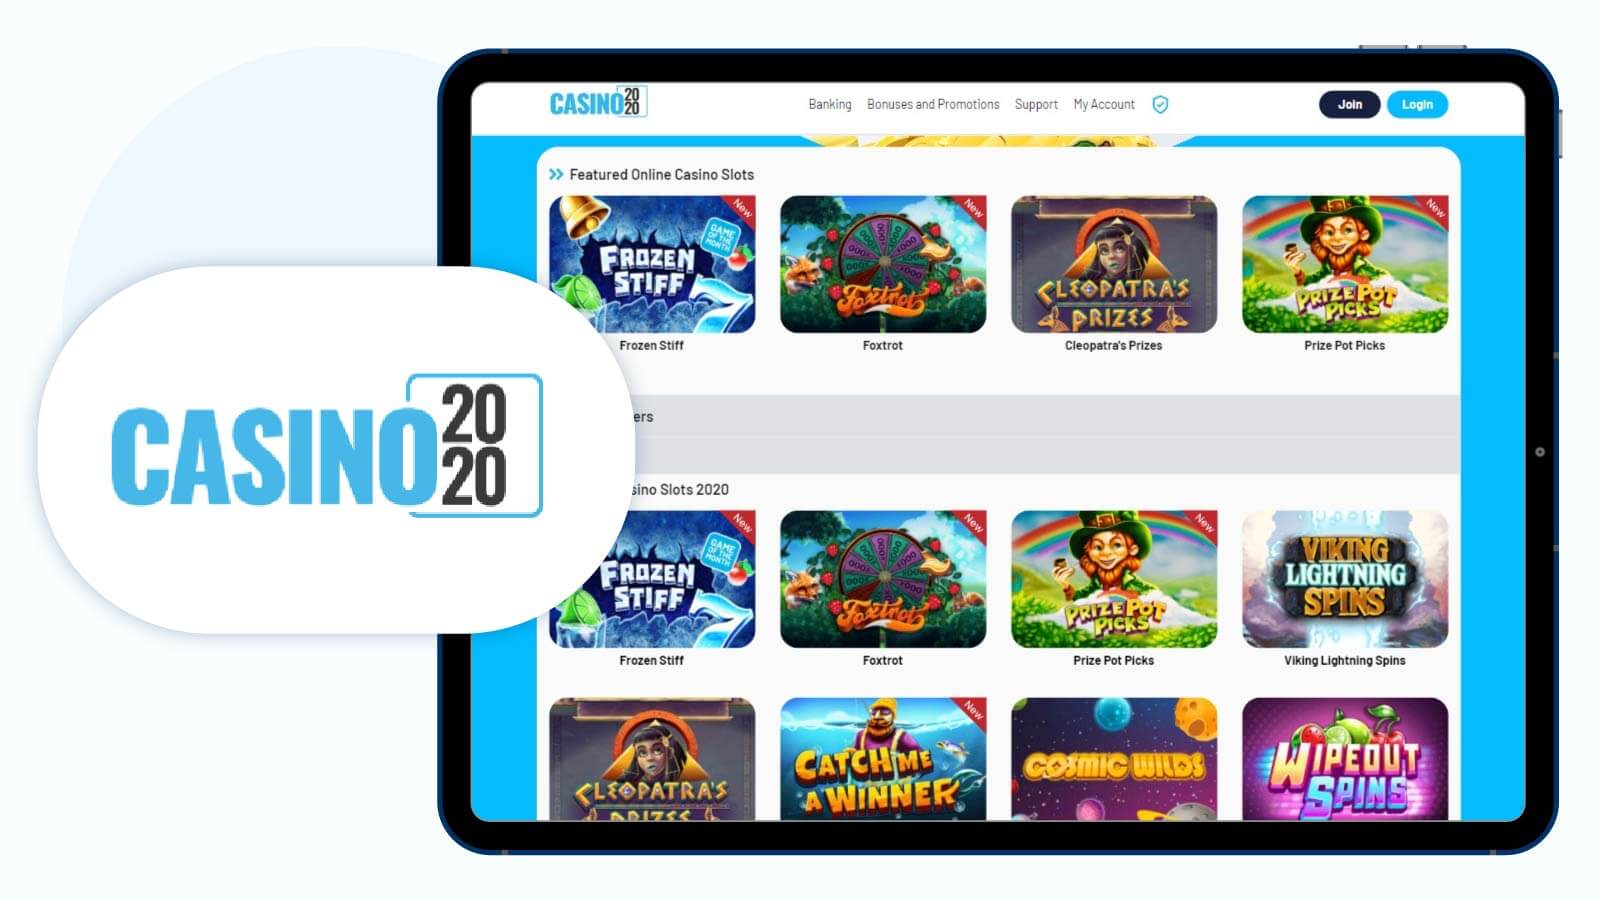 Casino-2020-top-mobile-verification-free-spins-for-UK